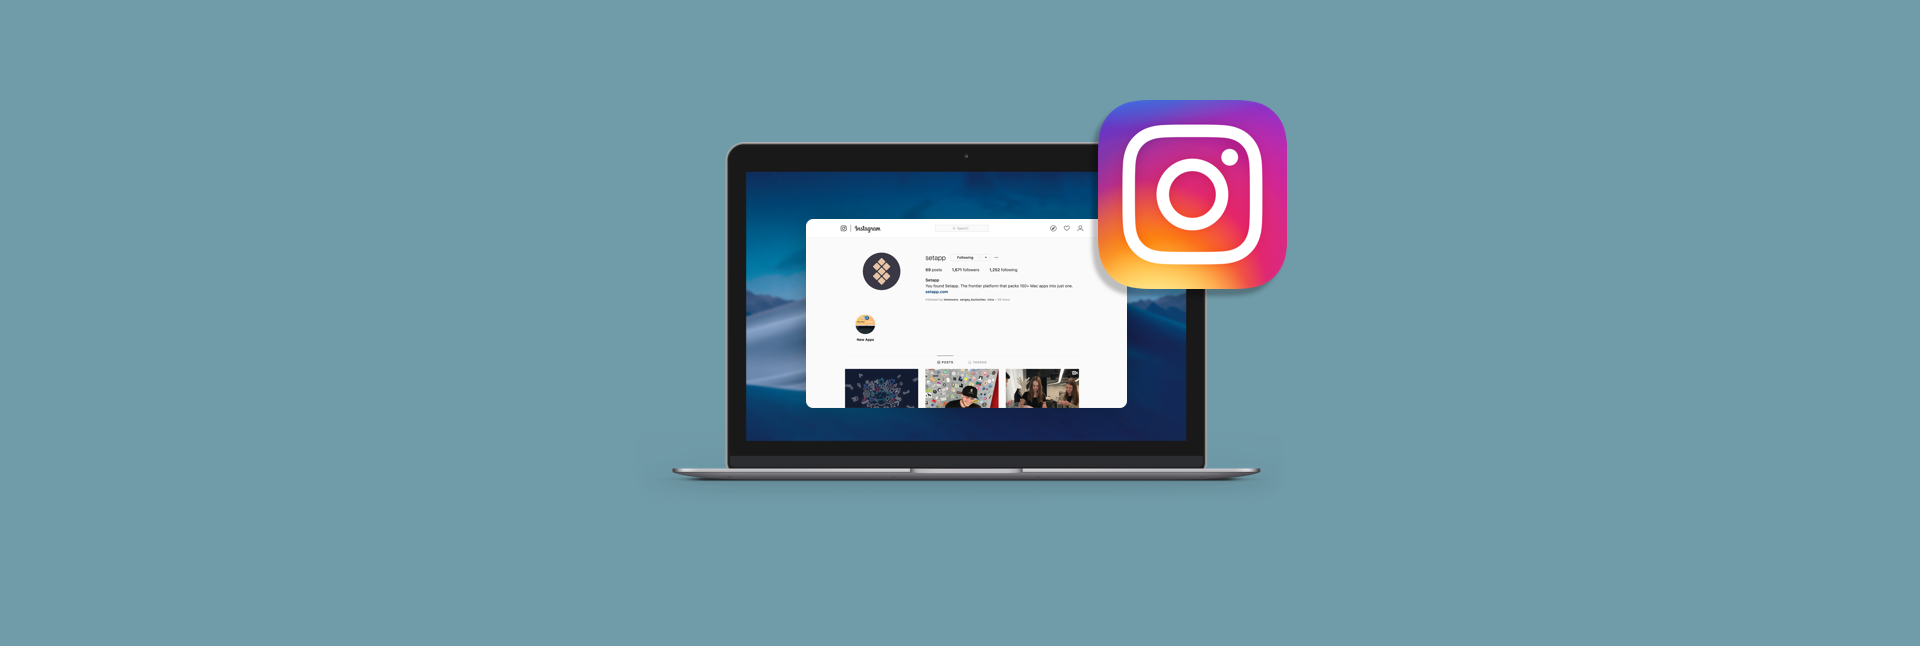 how to check instagram messages on a mac computer